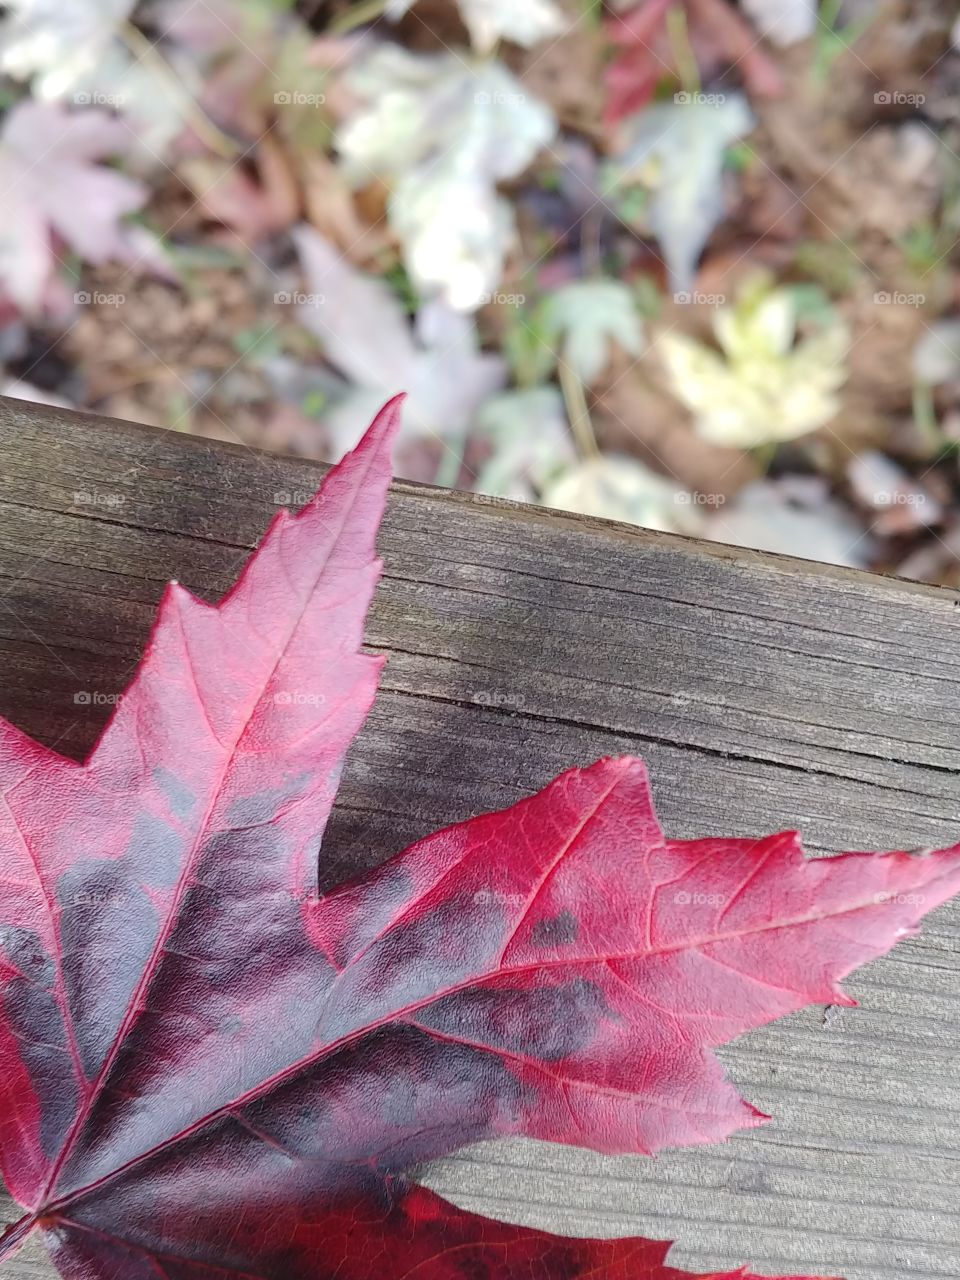 A close-up of a red and black fallen leaf resting on a wooden bench above other leaves blirred on the ground in the Fall.